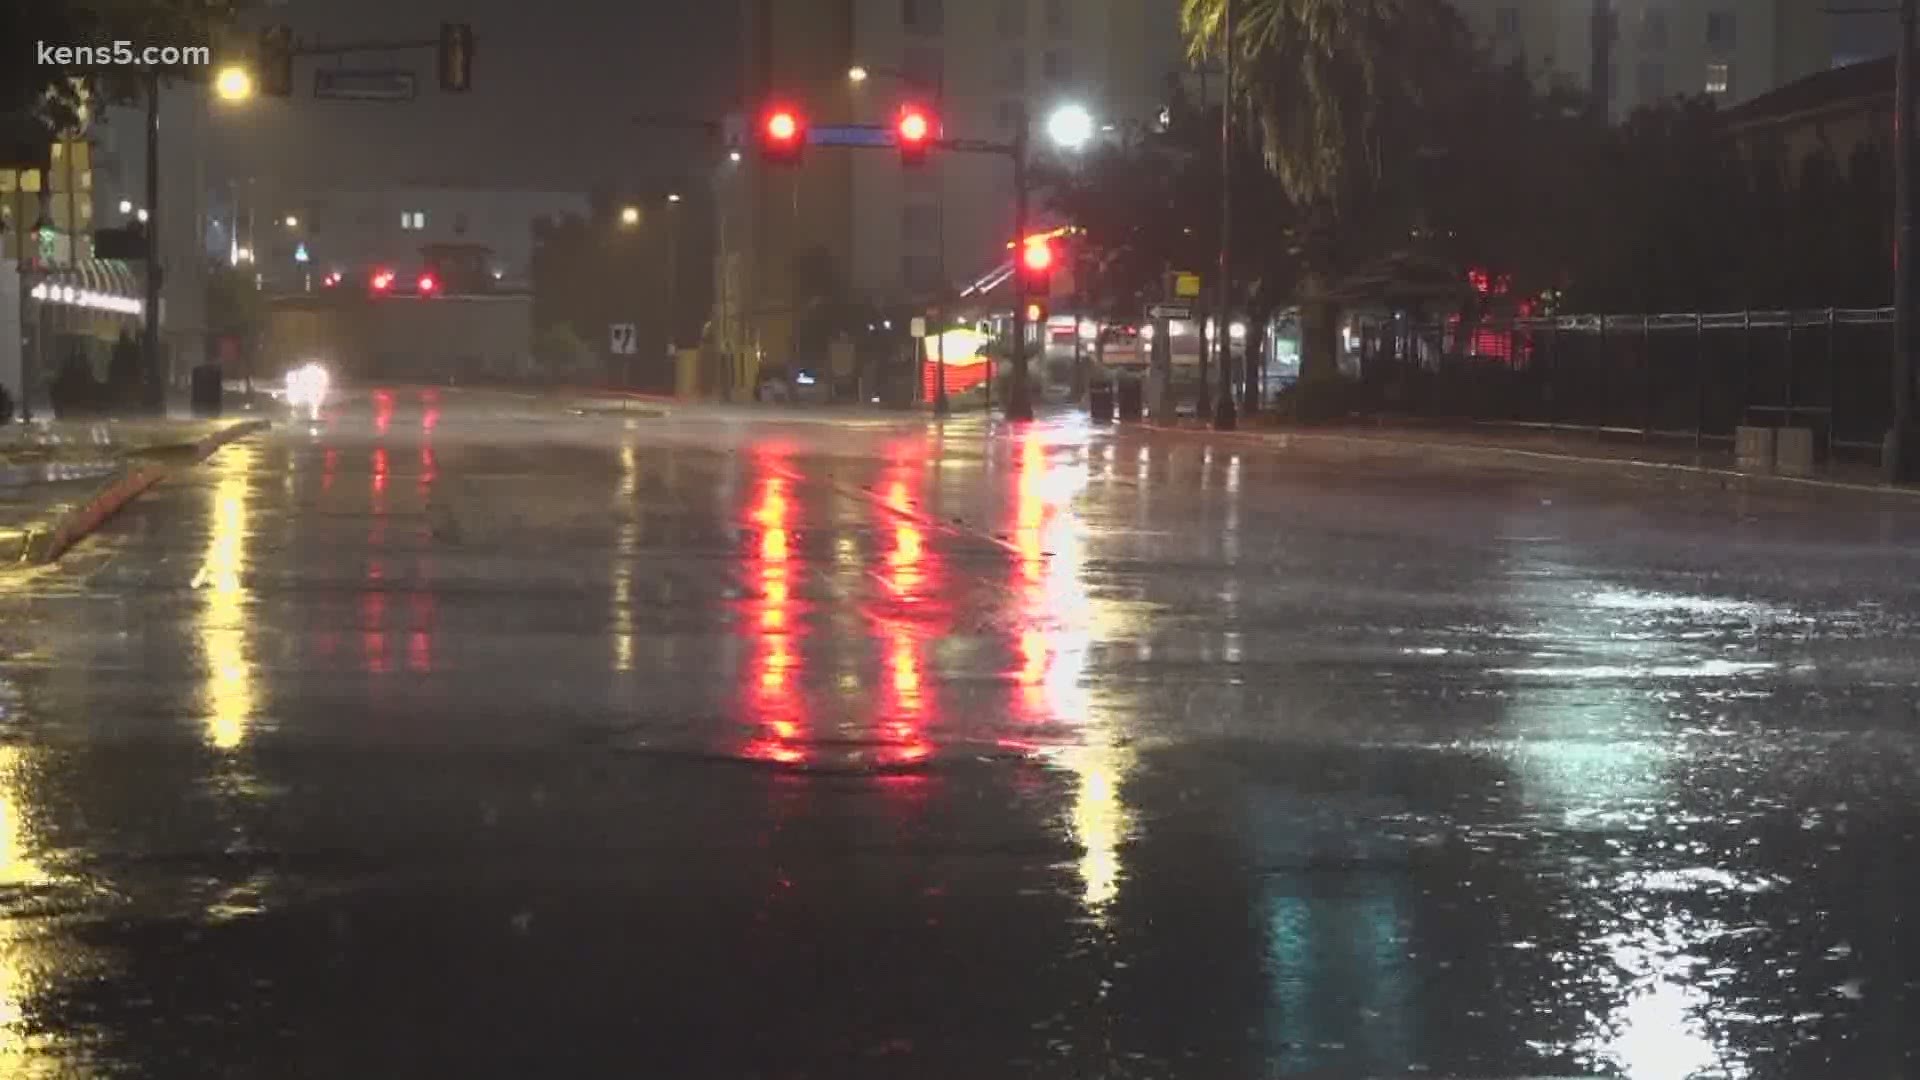 Drivers are warned to be careful on the roads this morning after some heavy rain overnight.